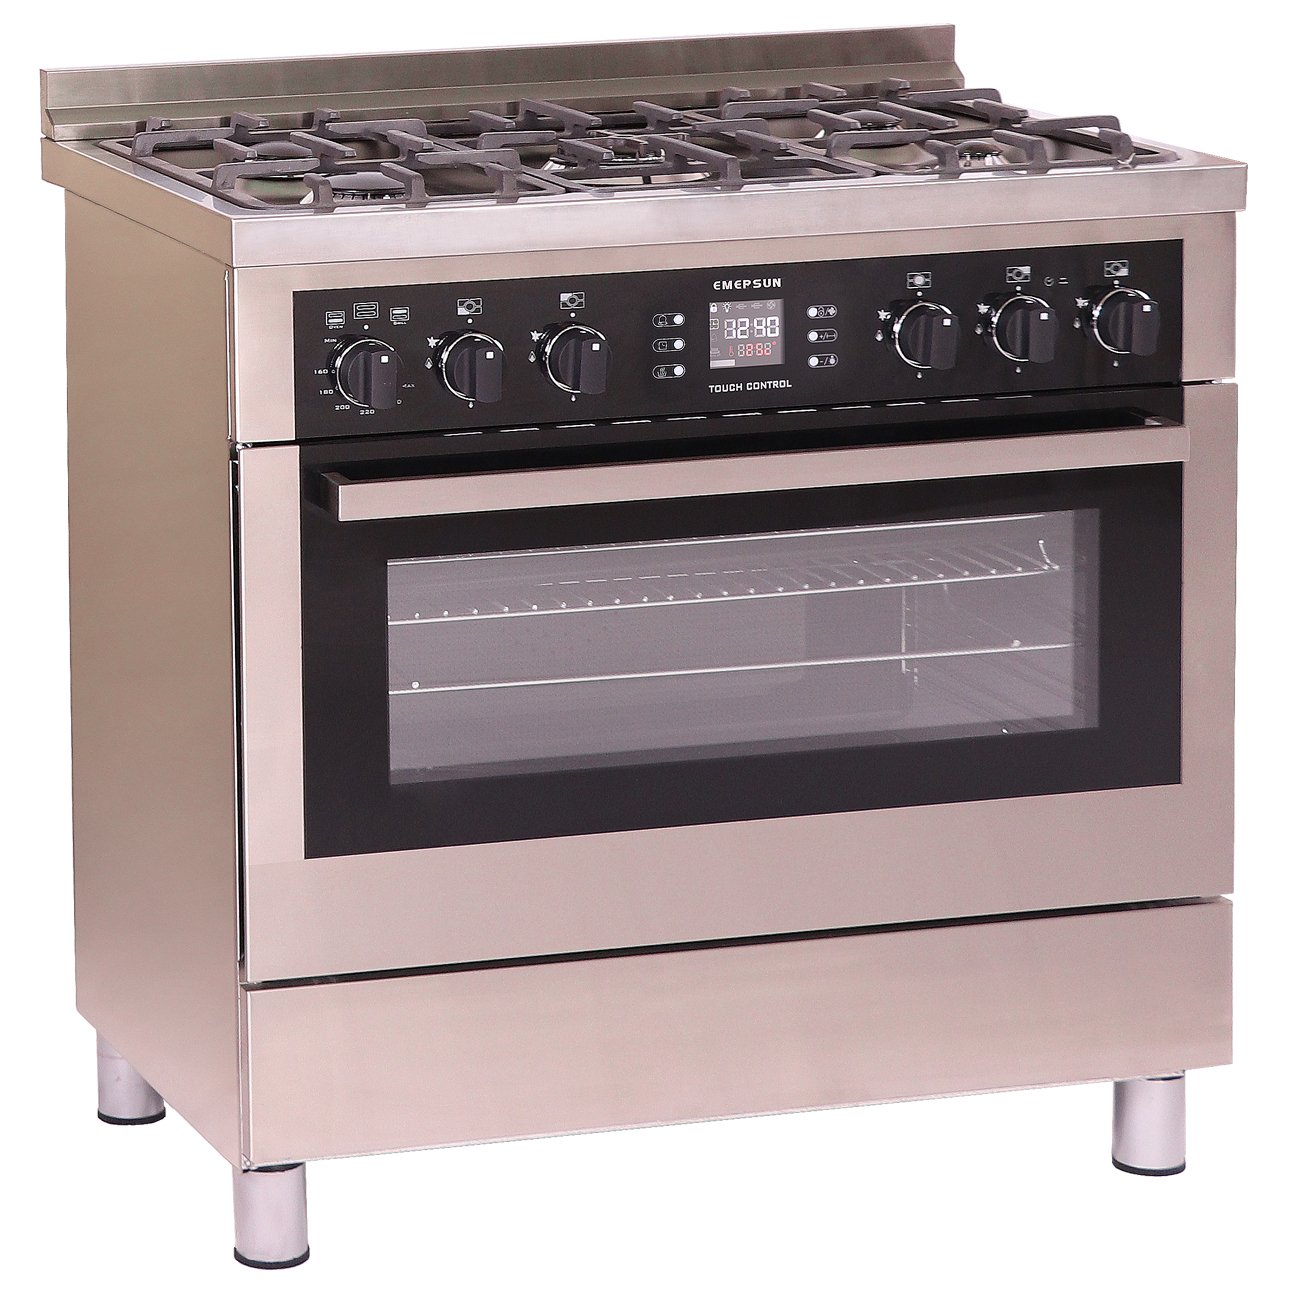 Exalted Gas Cooker Model G5MD